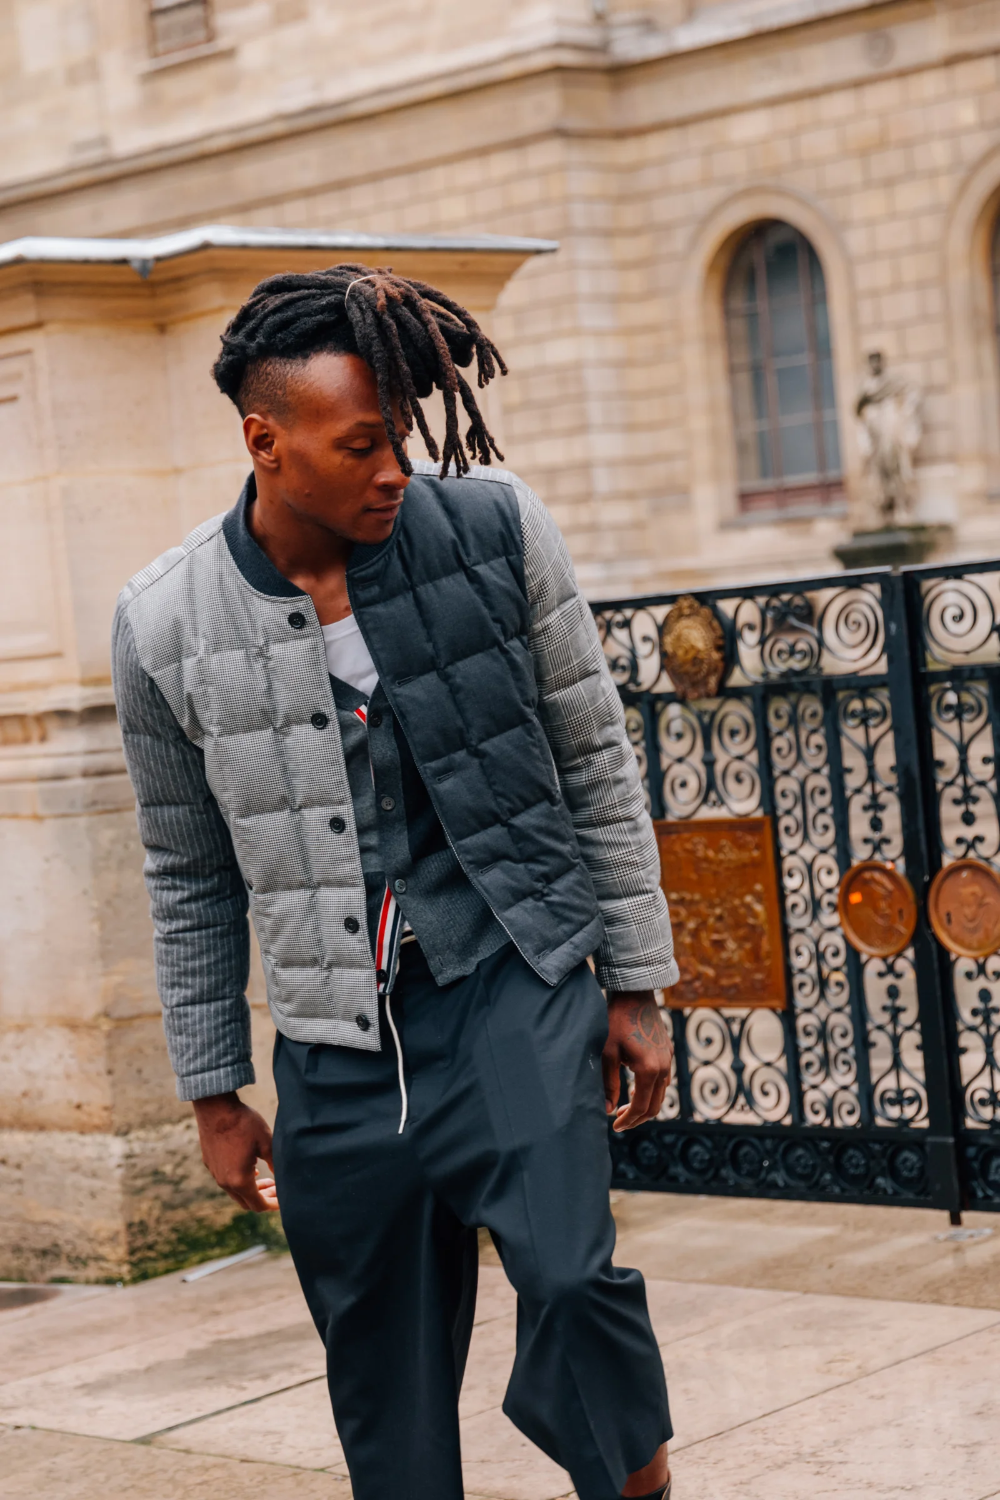 The Best Street Style from Paris Fashion Week - The Best Street Style from Paris Fashion Week -   style Urban hipster